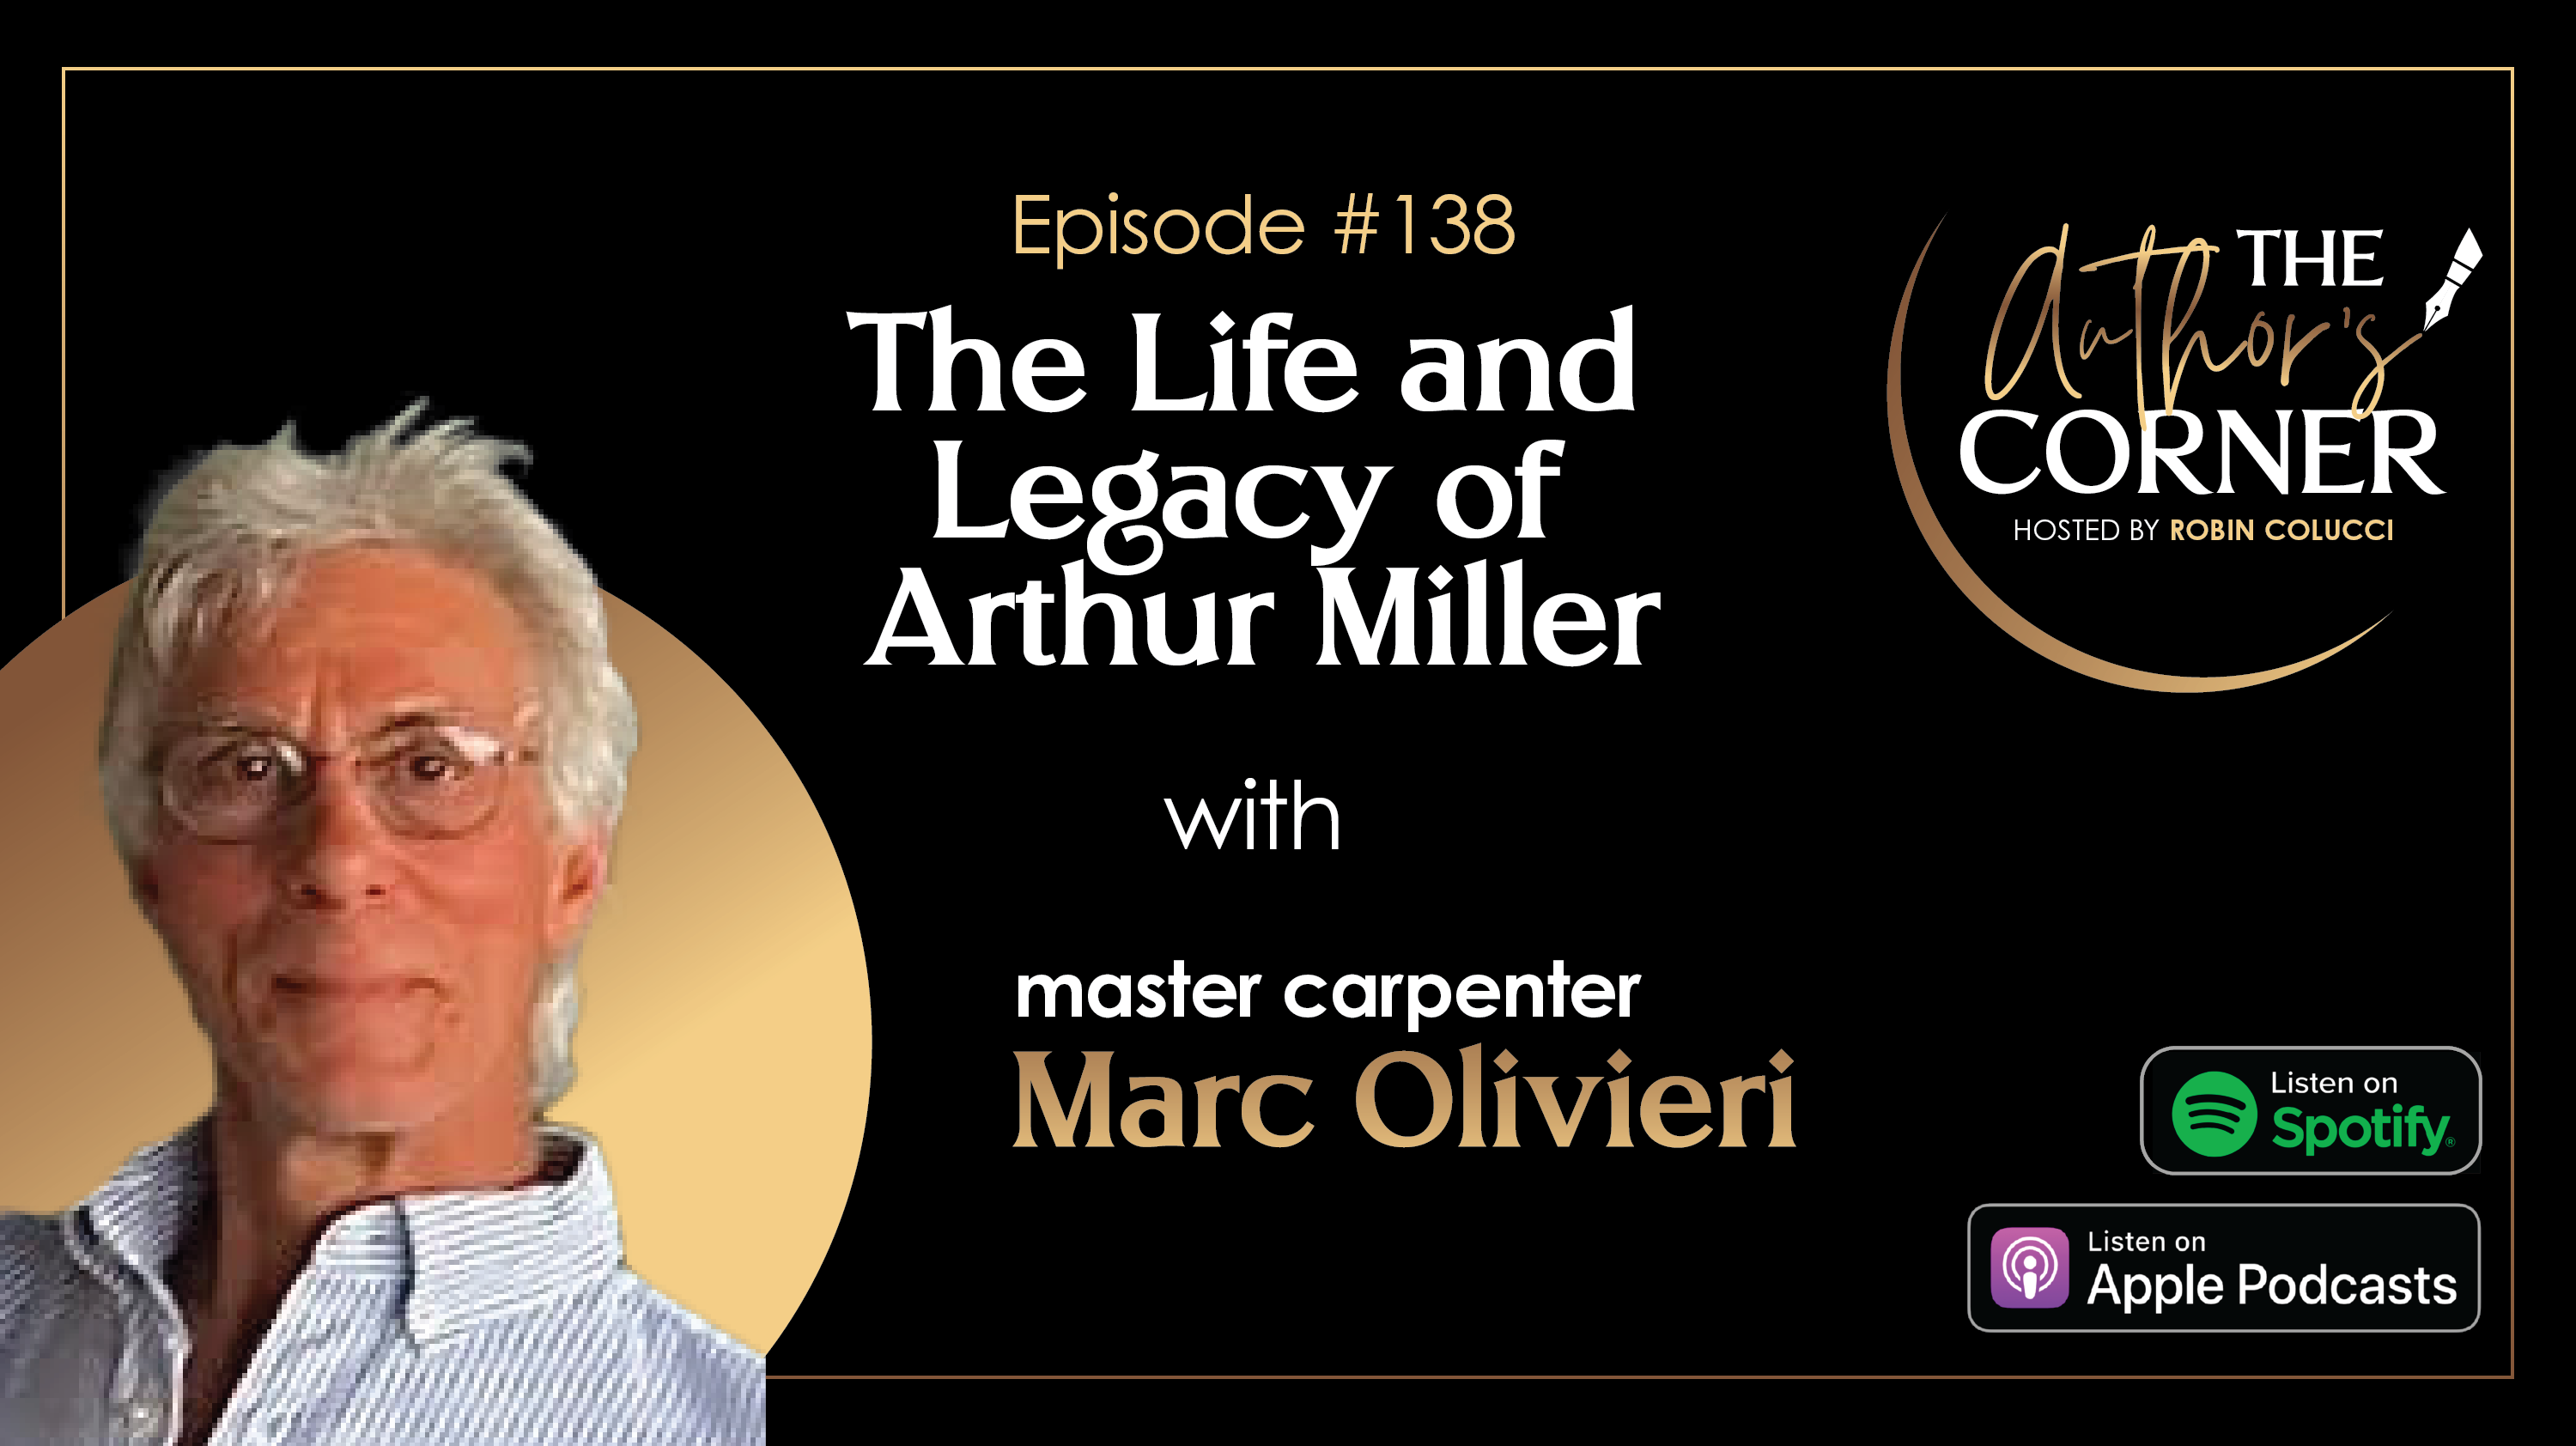 The Life and Legacy of Arthur Miller with Marc Olivieri